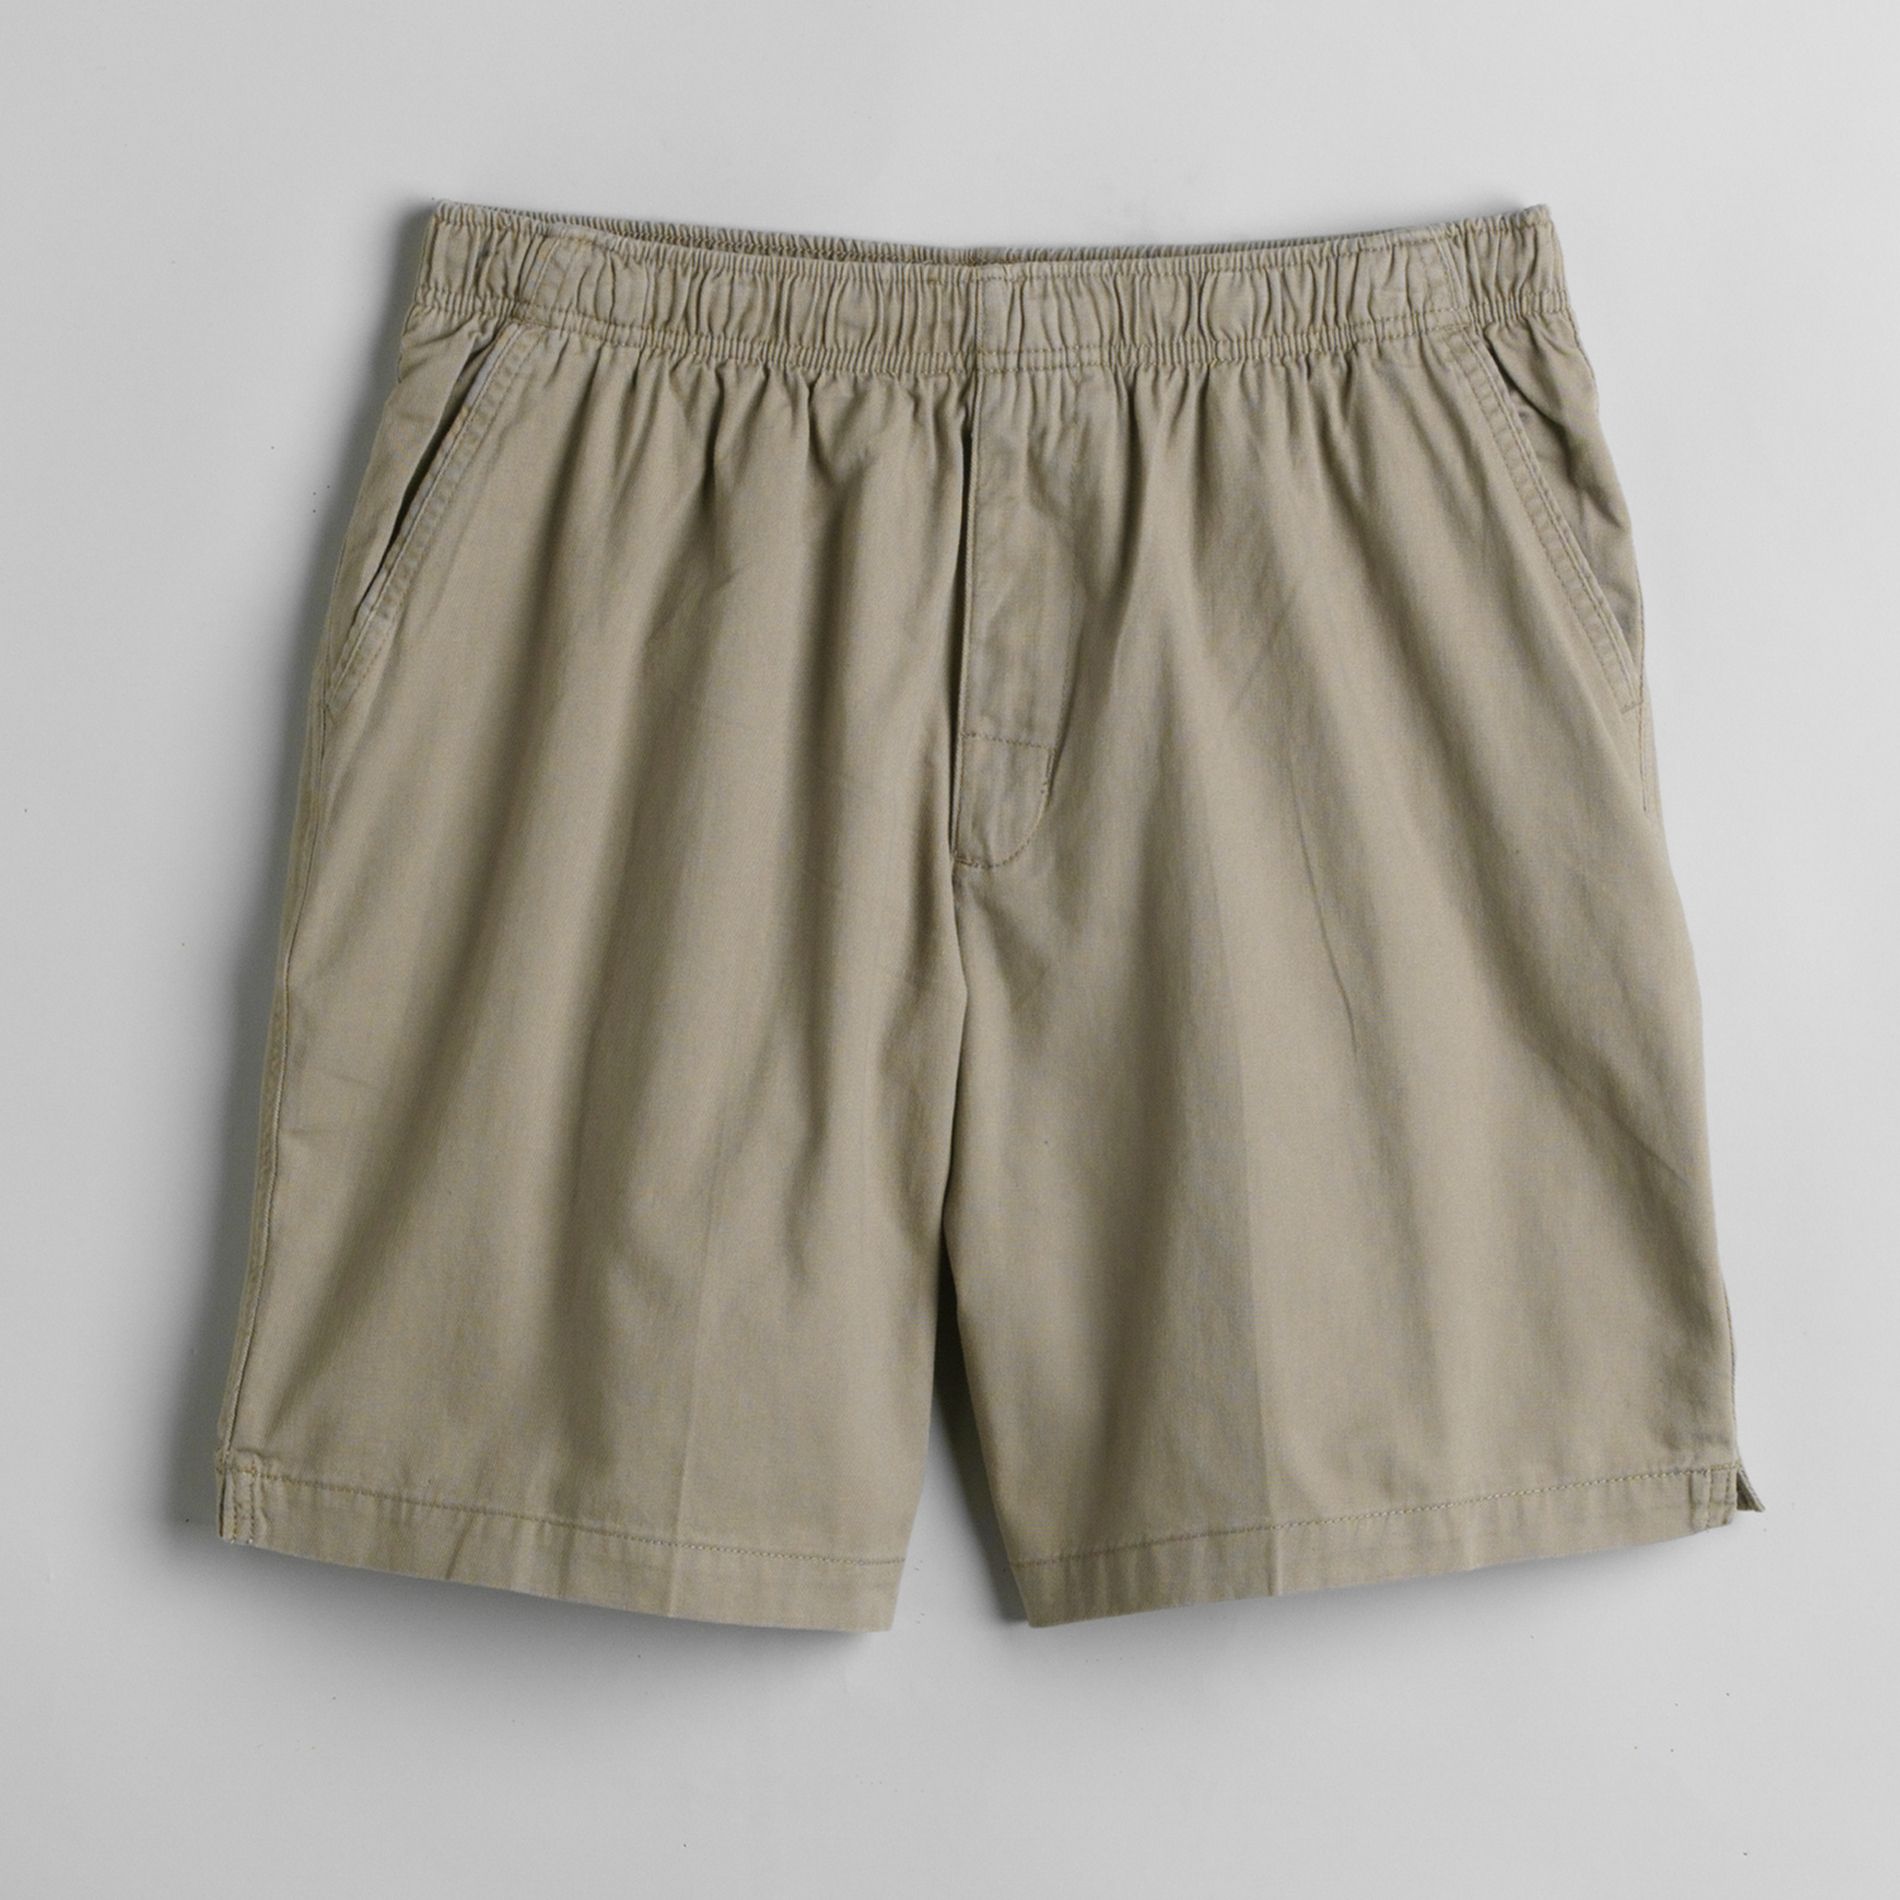 Basic Editions Men's Solid Twill Pull-On Shorts